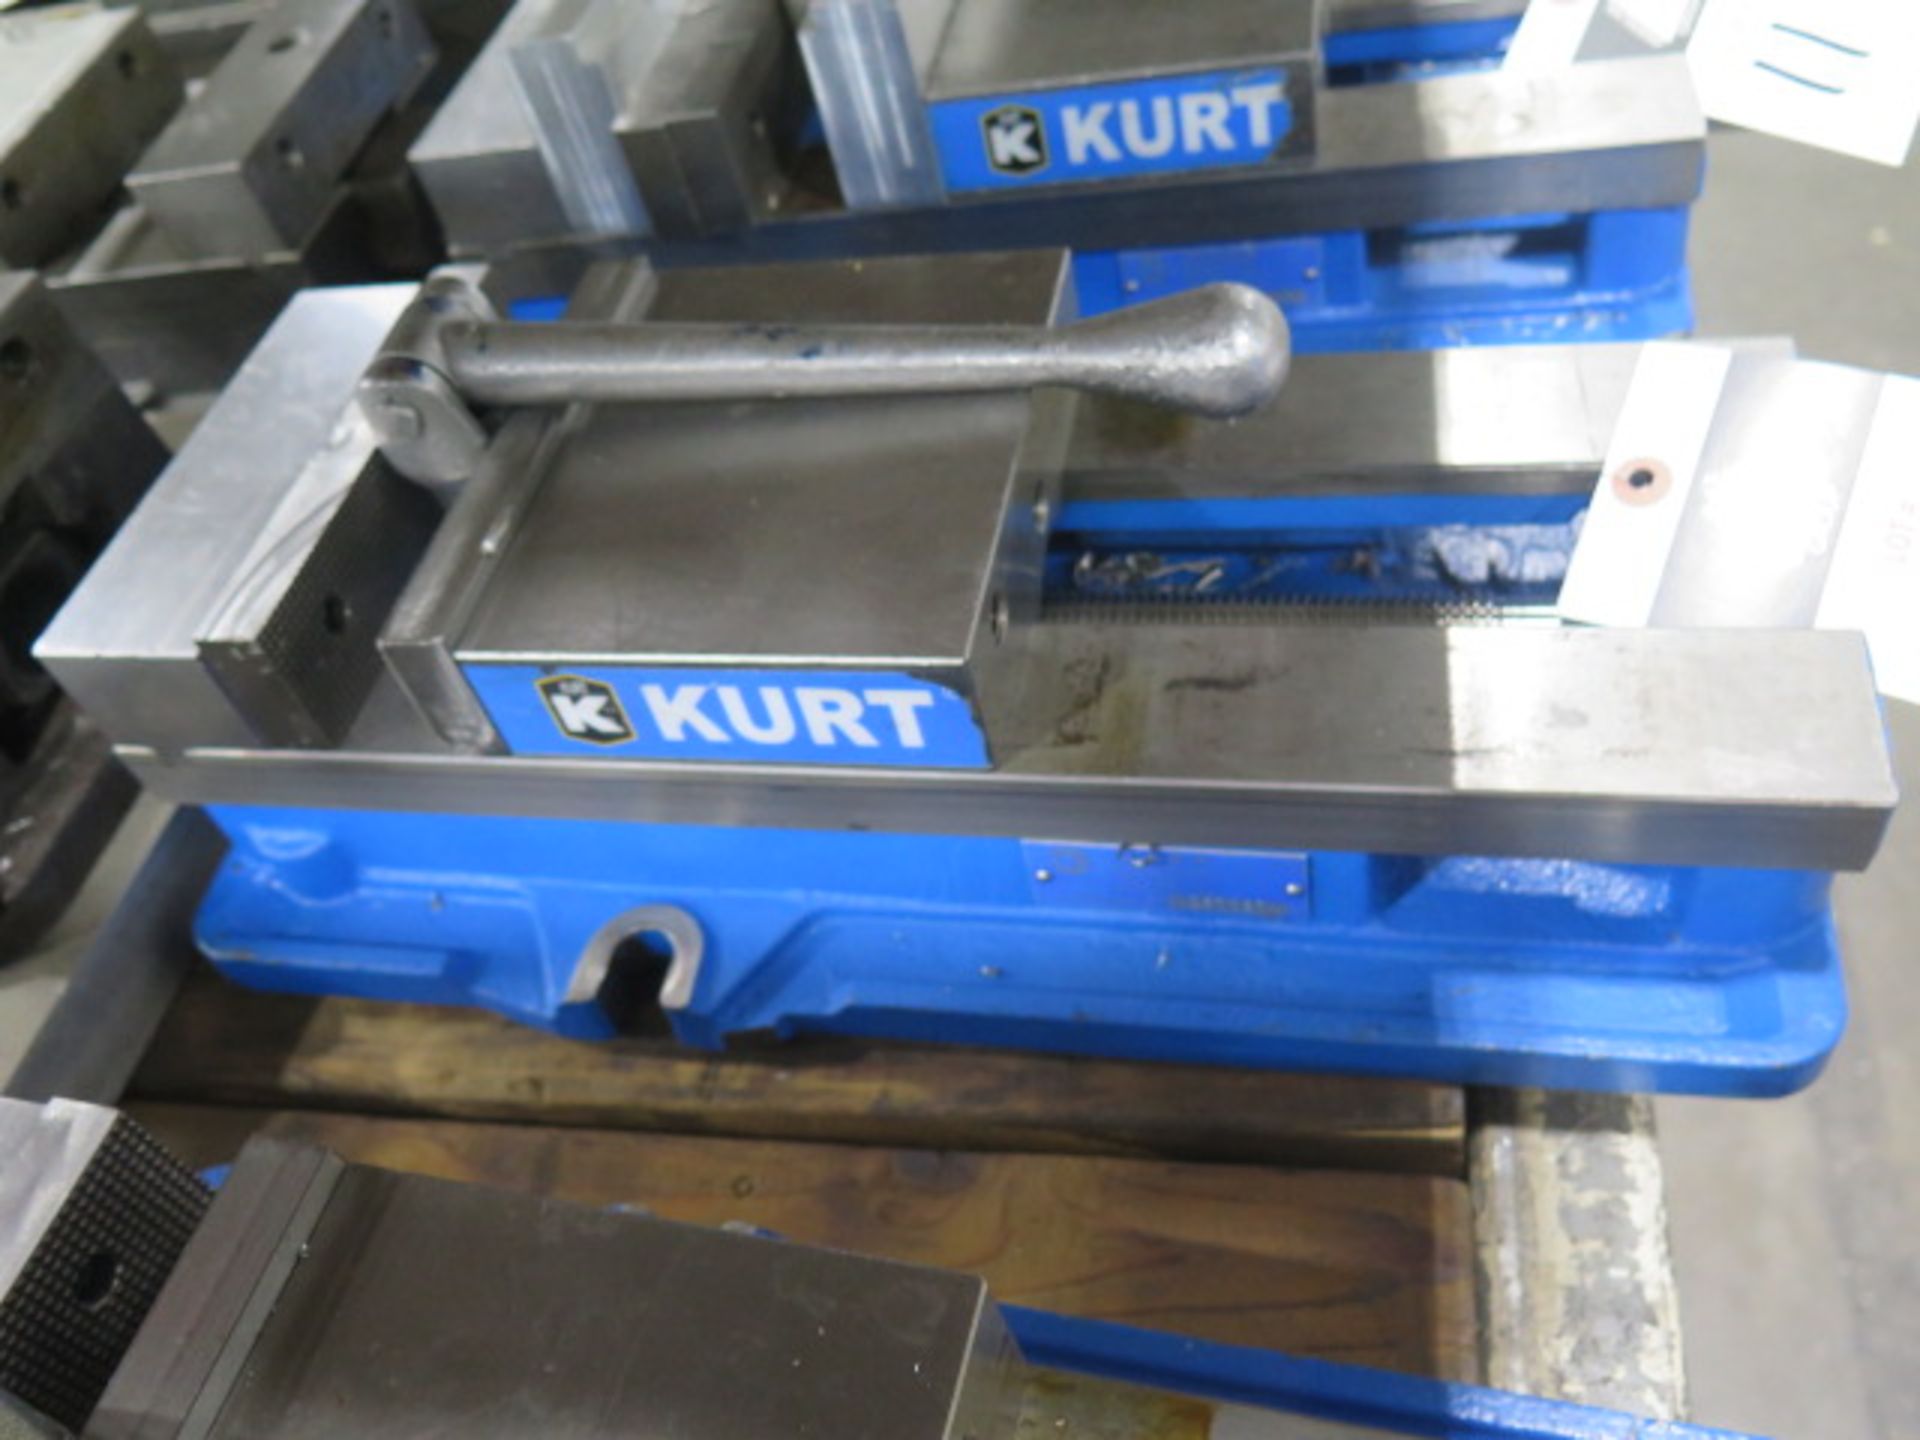 Kurt D688 6" Angle-Lock Vise (SOLD AS-IS - NO WARRANTY) - Image 2 of 3